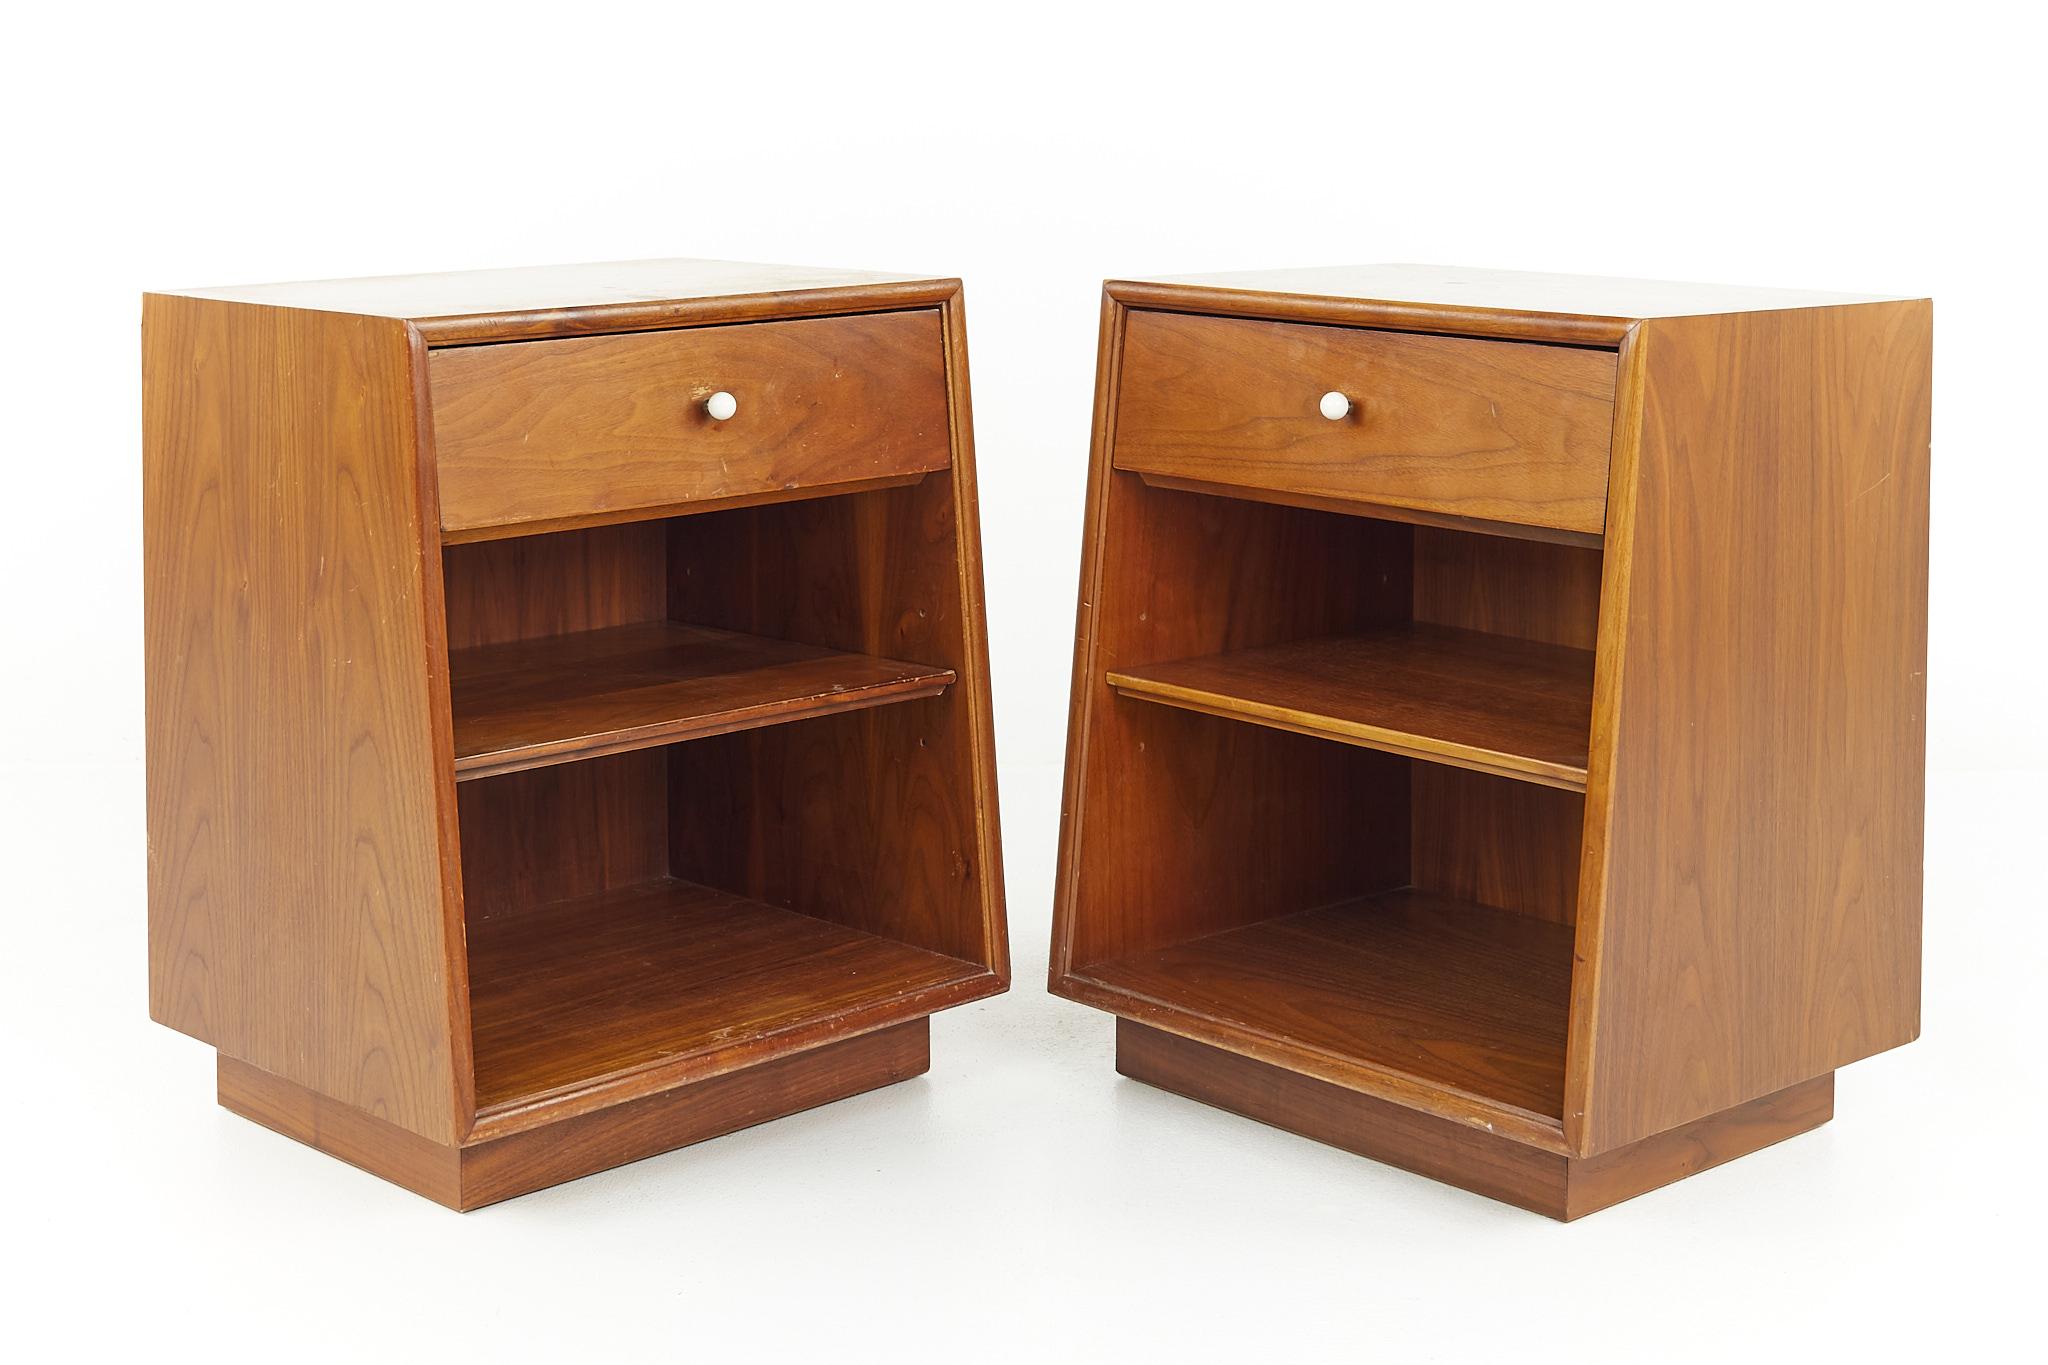 Kipp Stewart for Drexel Declaration mid century walnut nightstands - a pair

Each nightstand measures: 20 wide x 16 deep x 24.25 inches high

All pieces of furniture can be had in what we call restored vintage condition. That means the piece is